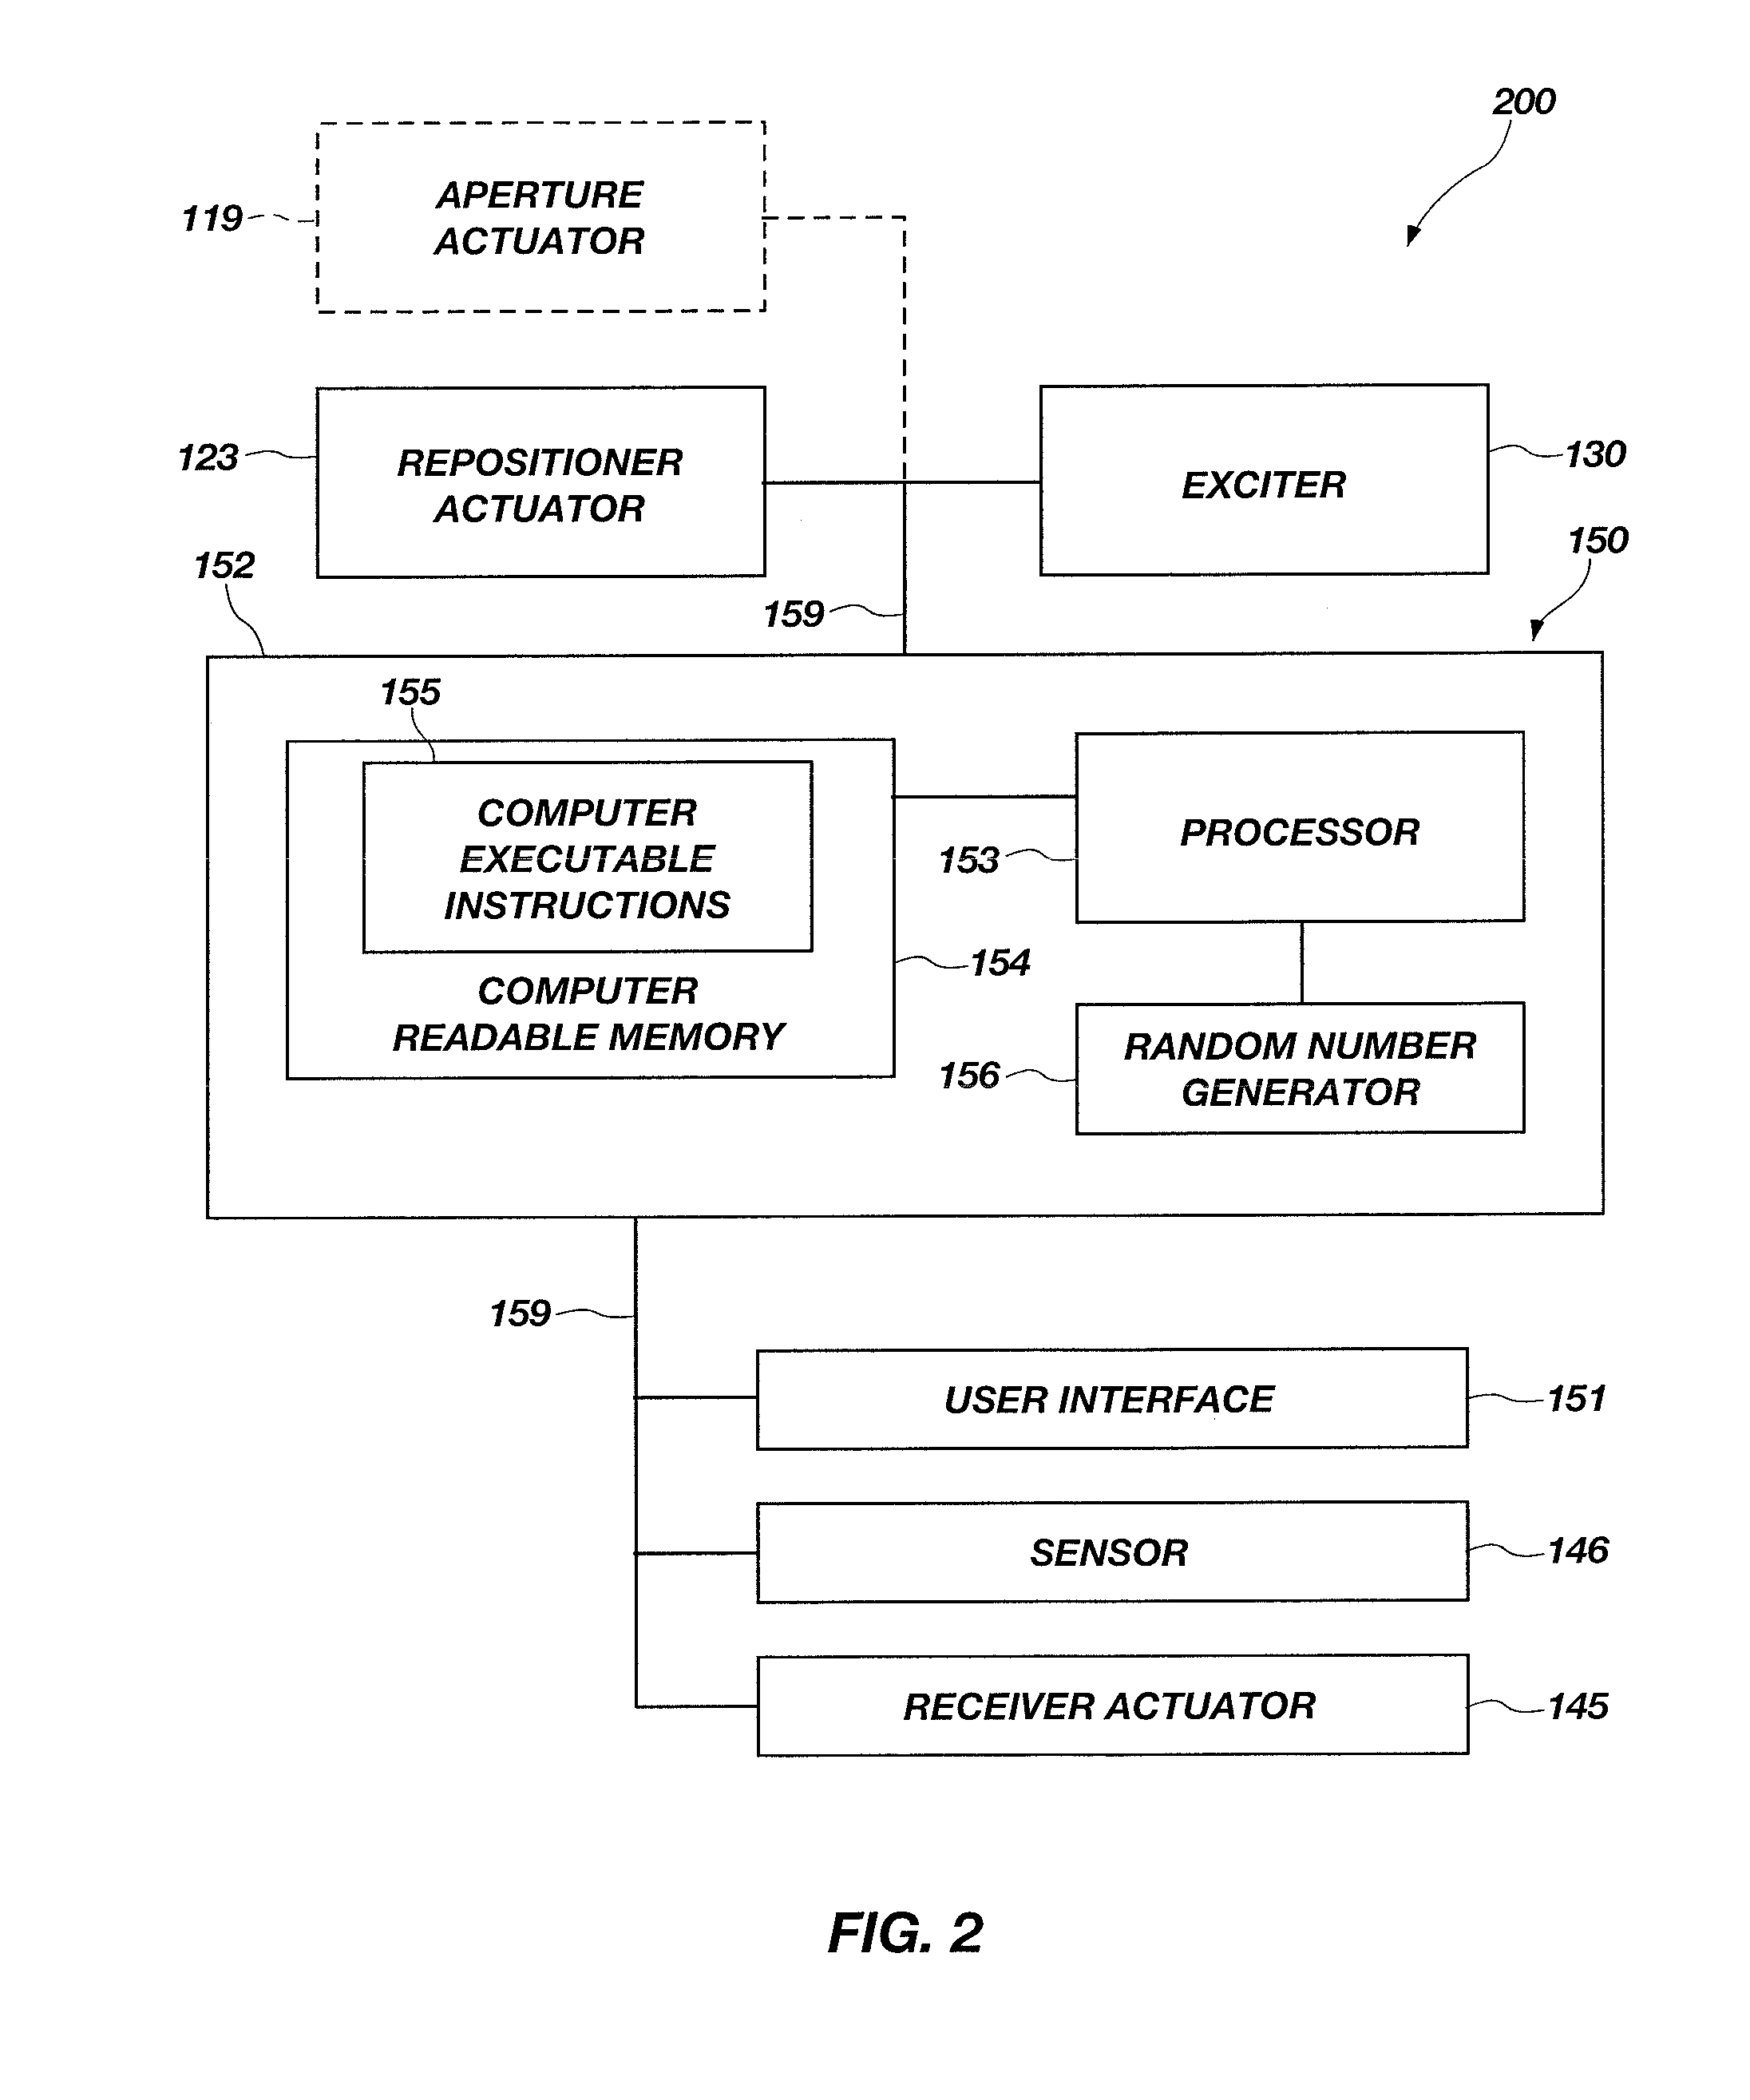 Card shuffling apparatuses and related methods